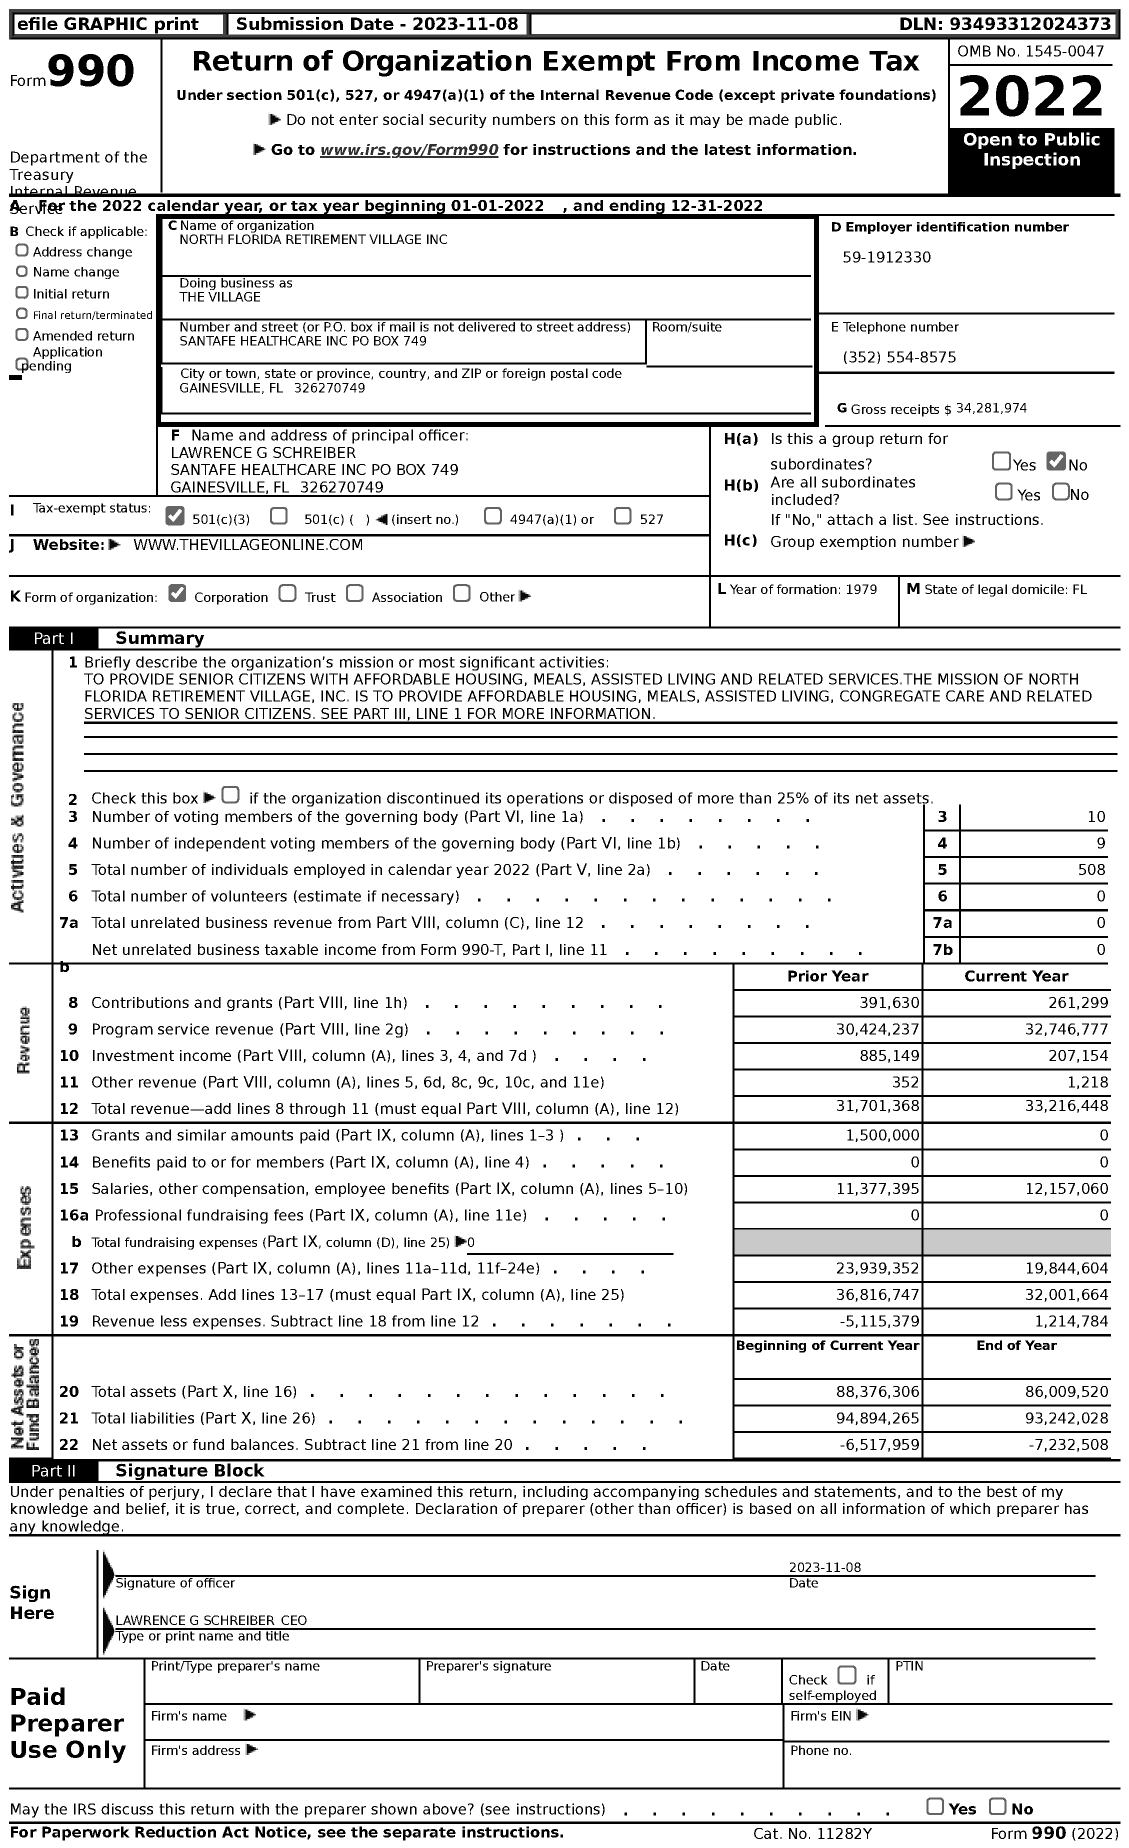 Image of first page of 2022 Form 990 for The Village / North Florida Retirement Village Inc